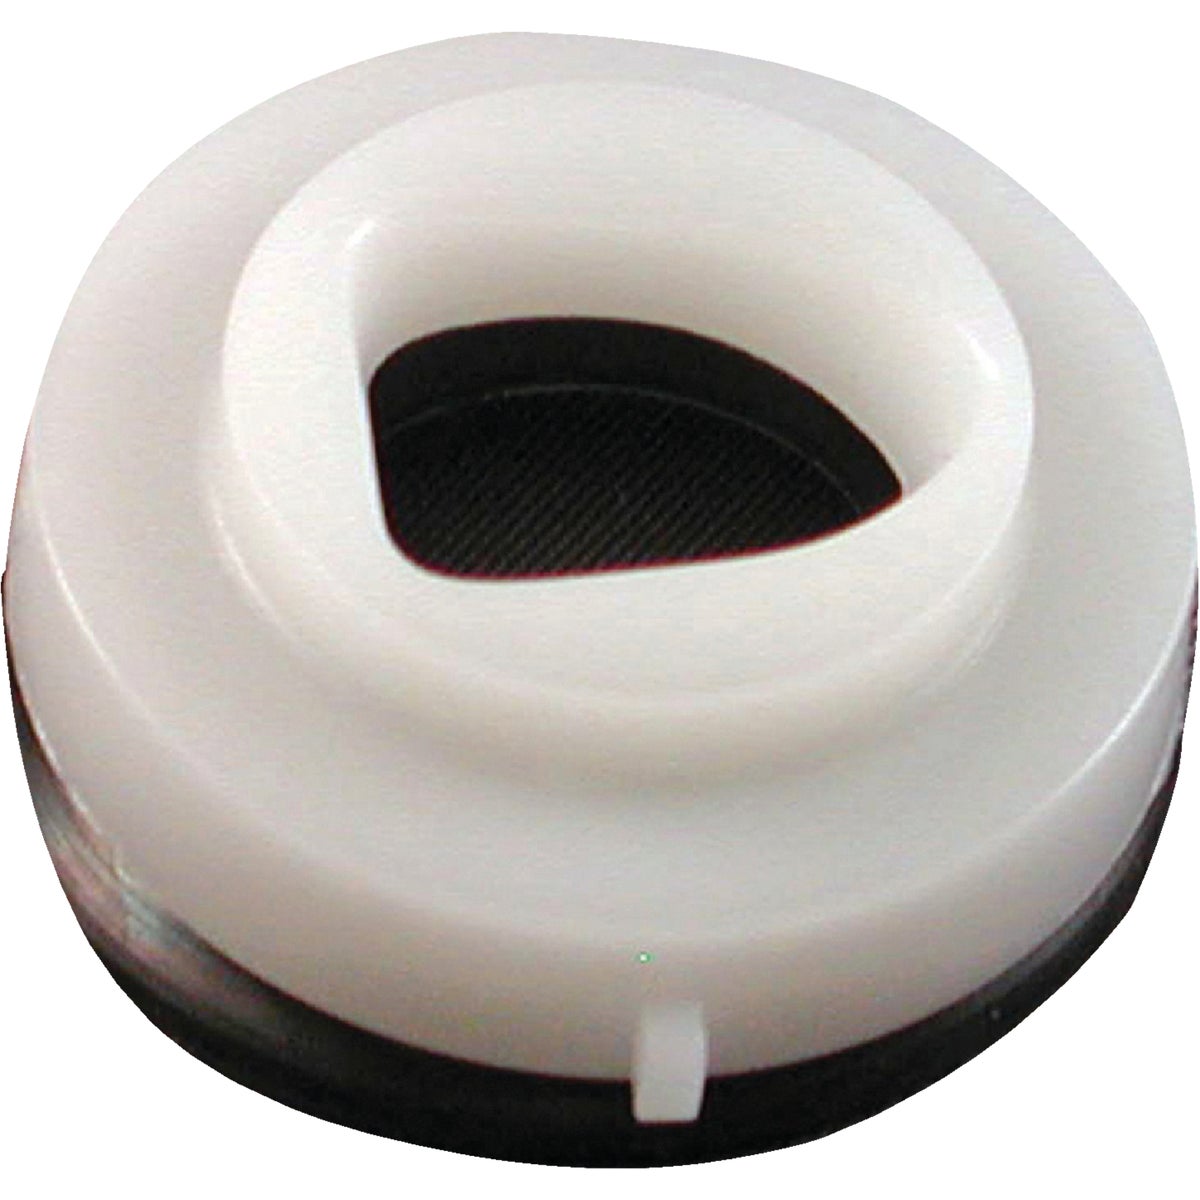 Item 400444, Designed for faucets with a #70 ball. Durable plastic construction.